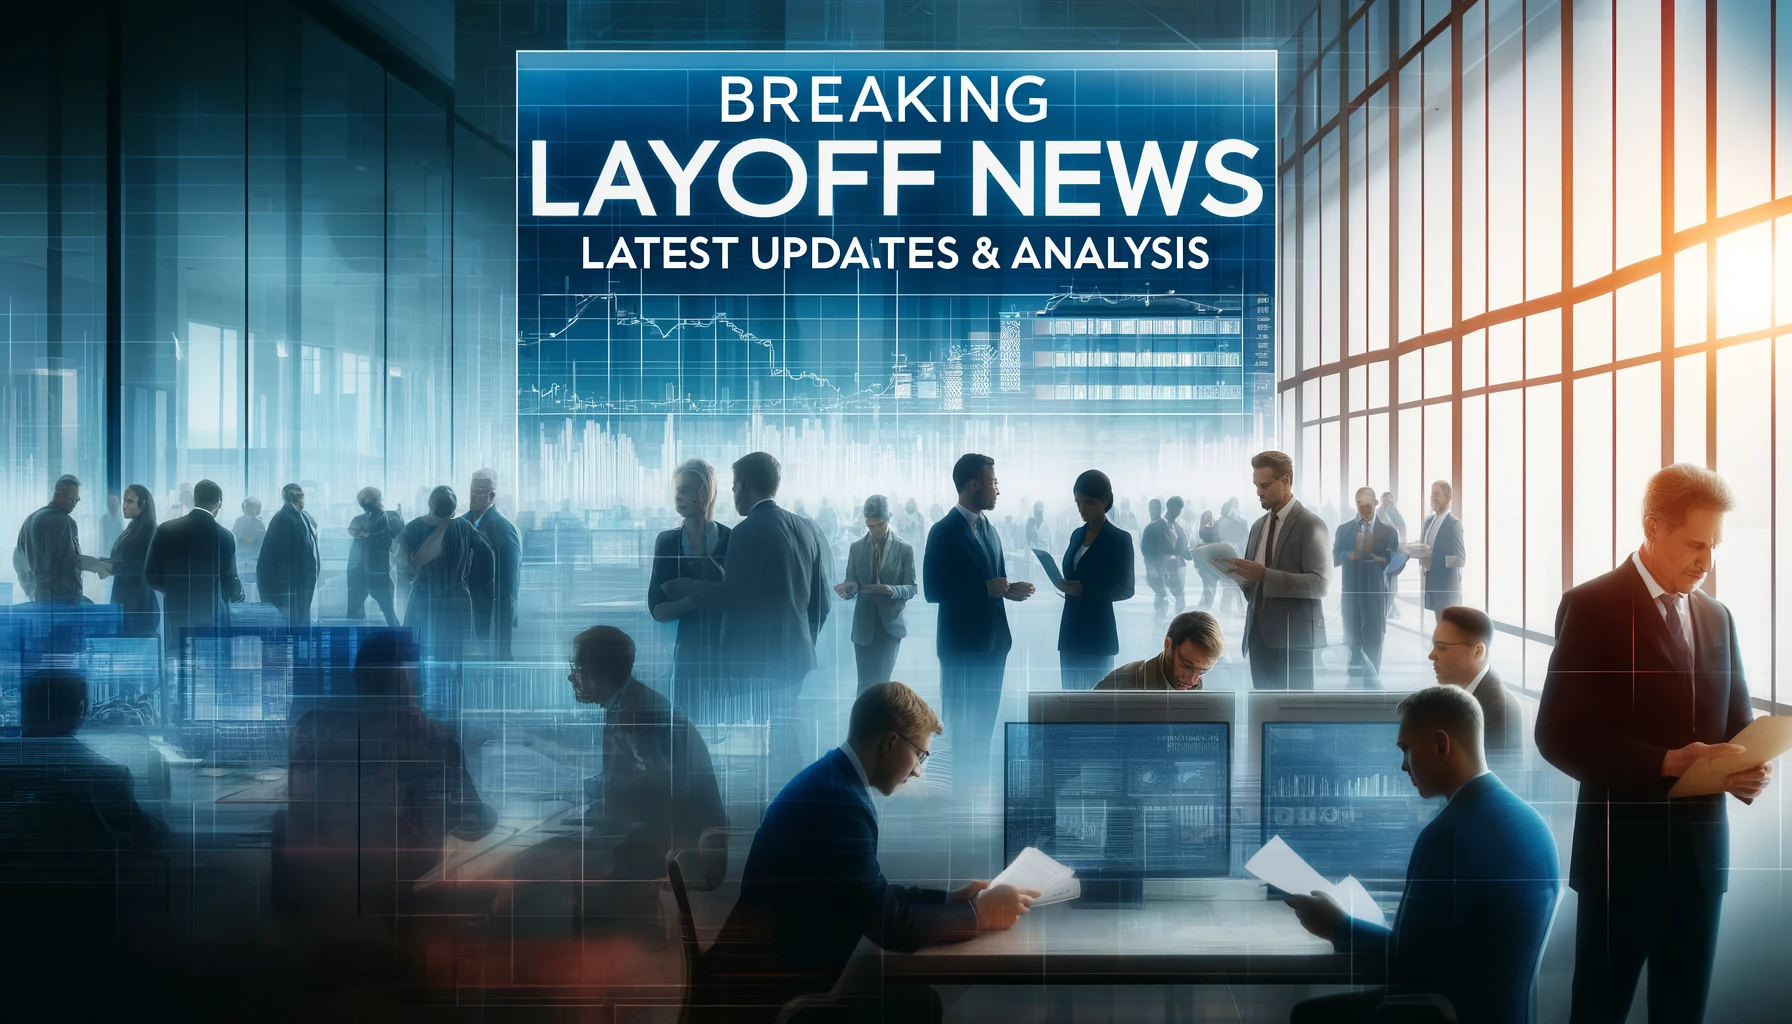 A digital image showing a diverse group of business professionals in a modern office setting, discussing and reacting to layoff news.